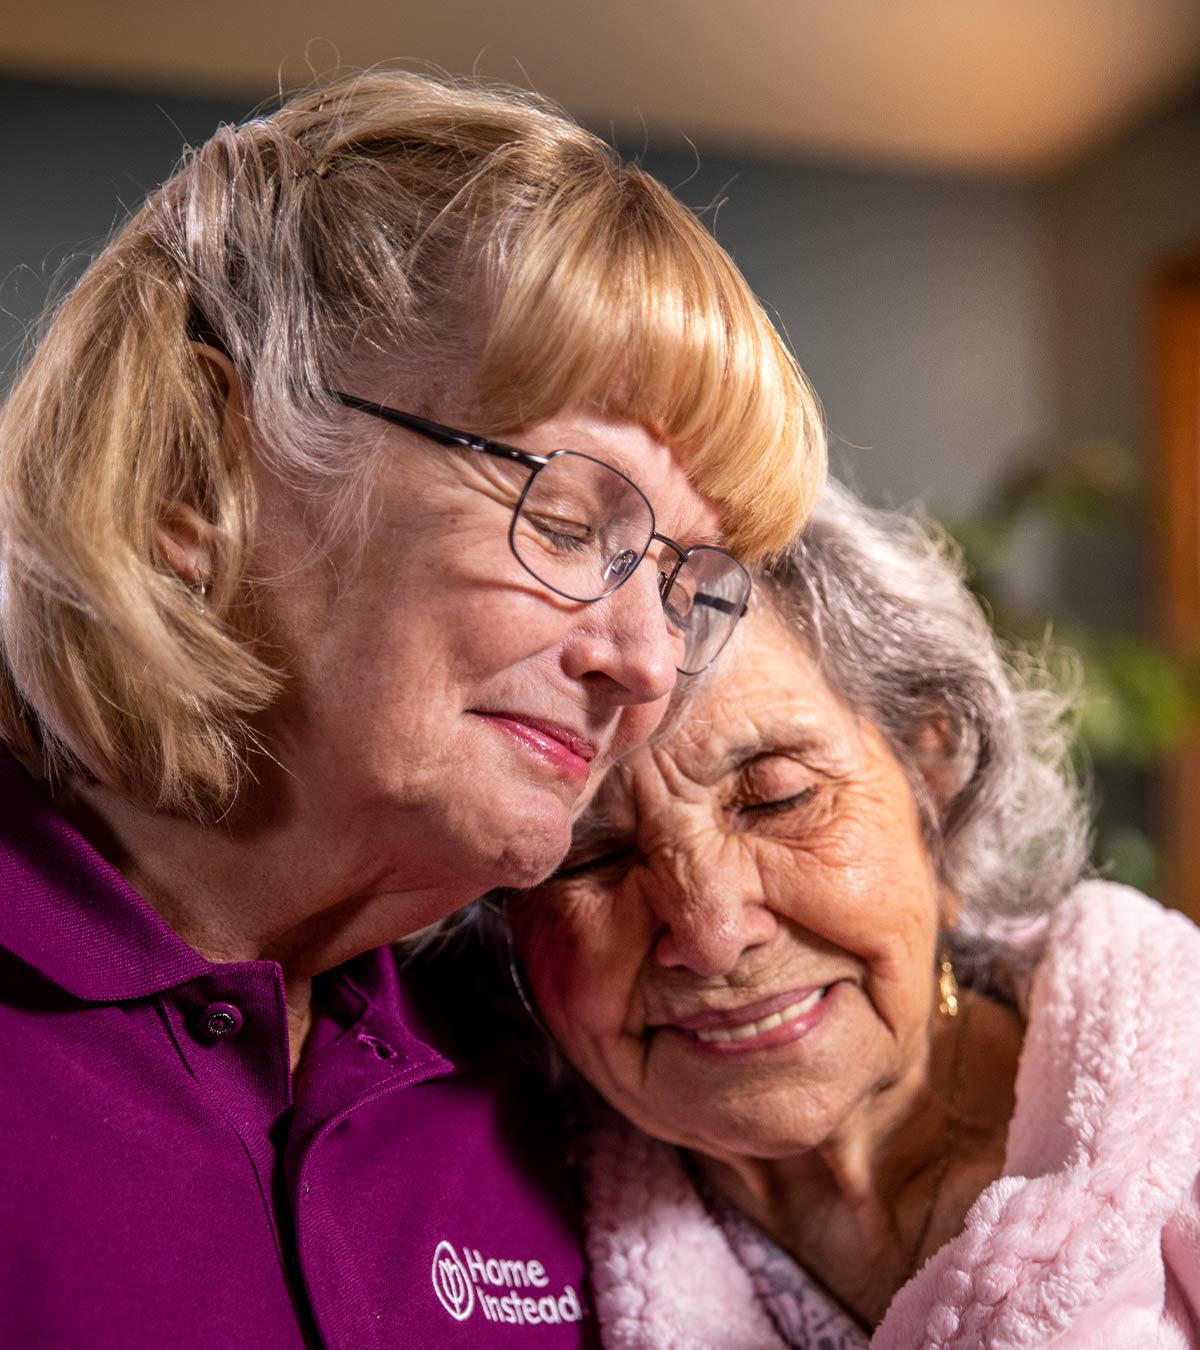 CAREGiver providing in-home senior care services. Home Instead of Dubuque, IA provides Elder Care to aging adults. 